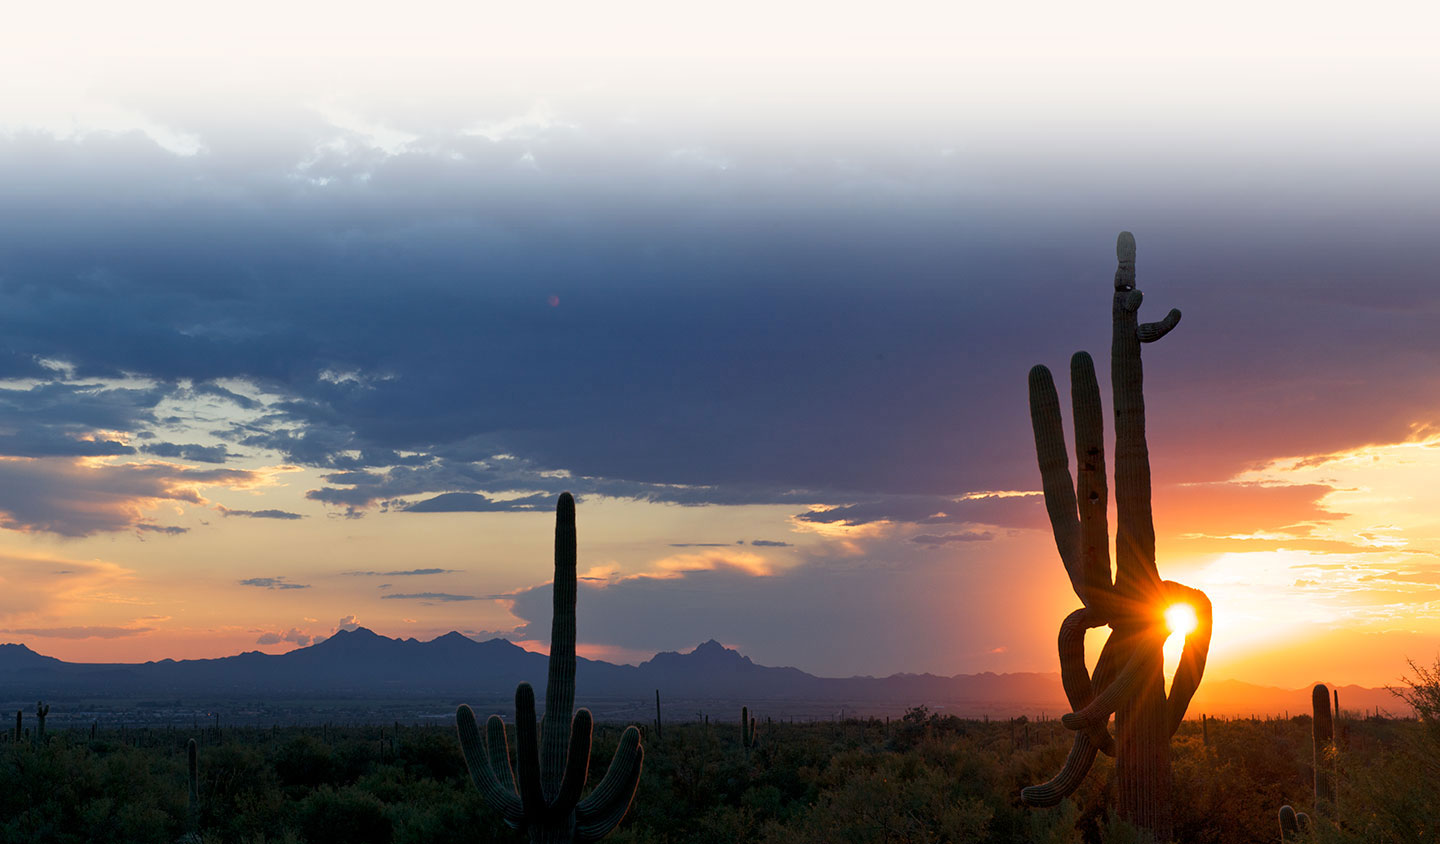 Immerse yourself in the heart of the Sonoran desert